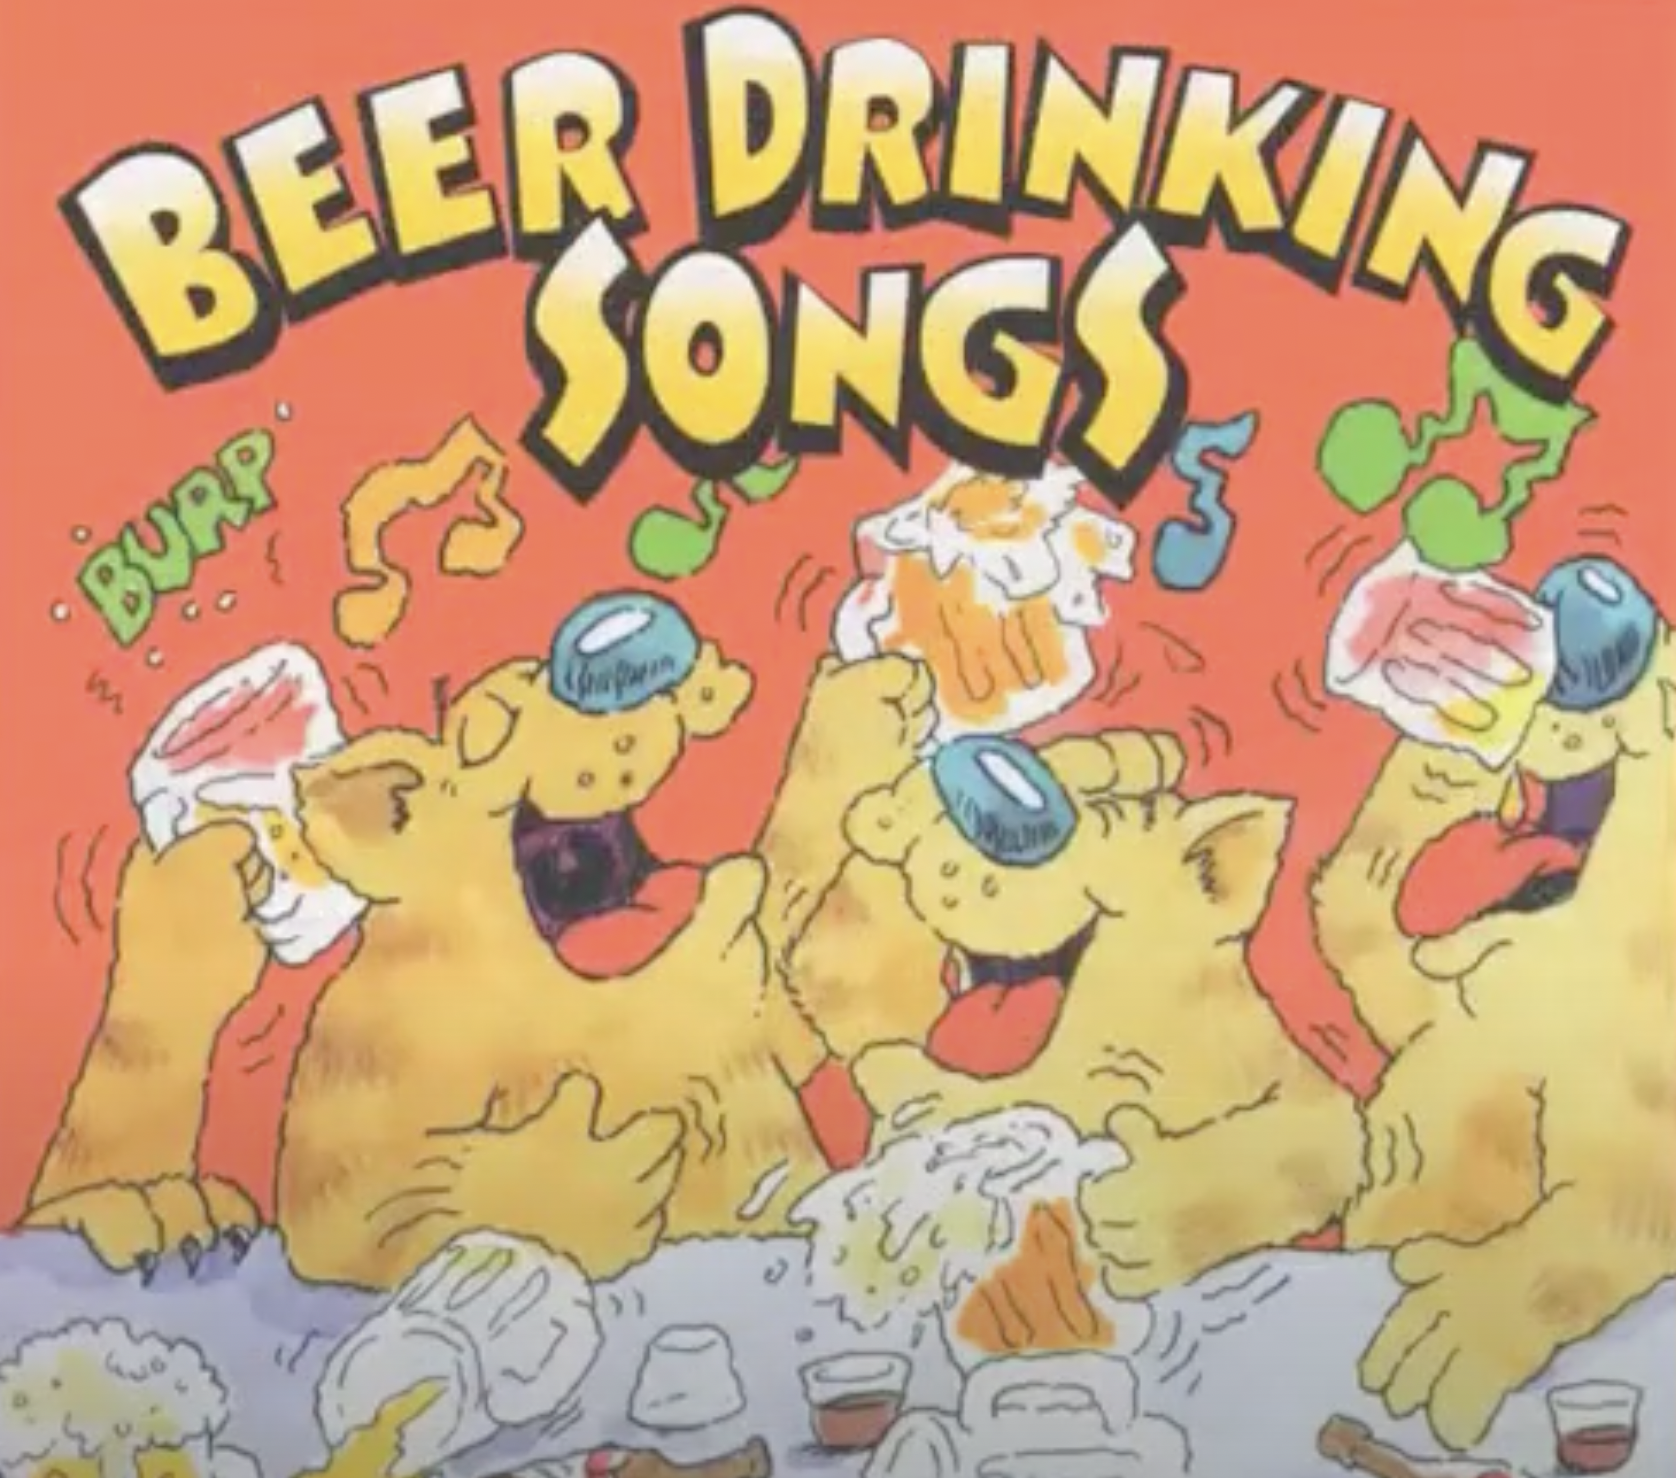 The Laughing Hyena Singers “Beer Drinking Songs”